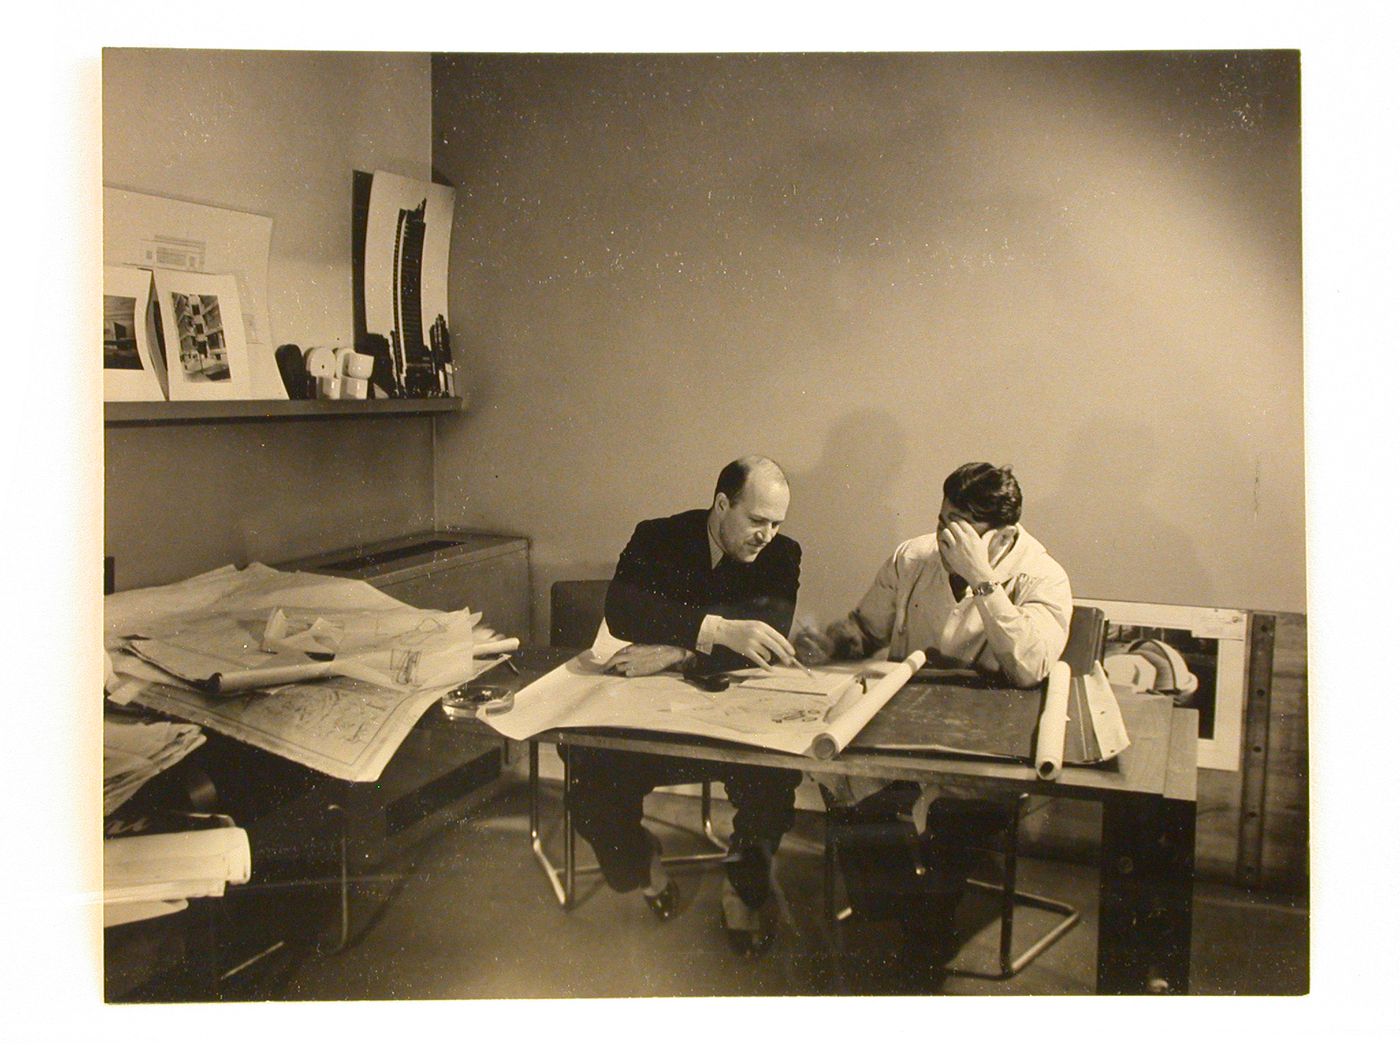 Portrait of Lescaze and another man at work with architectural plans